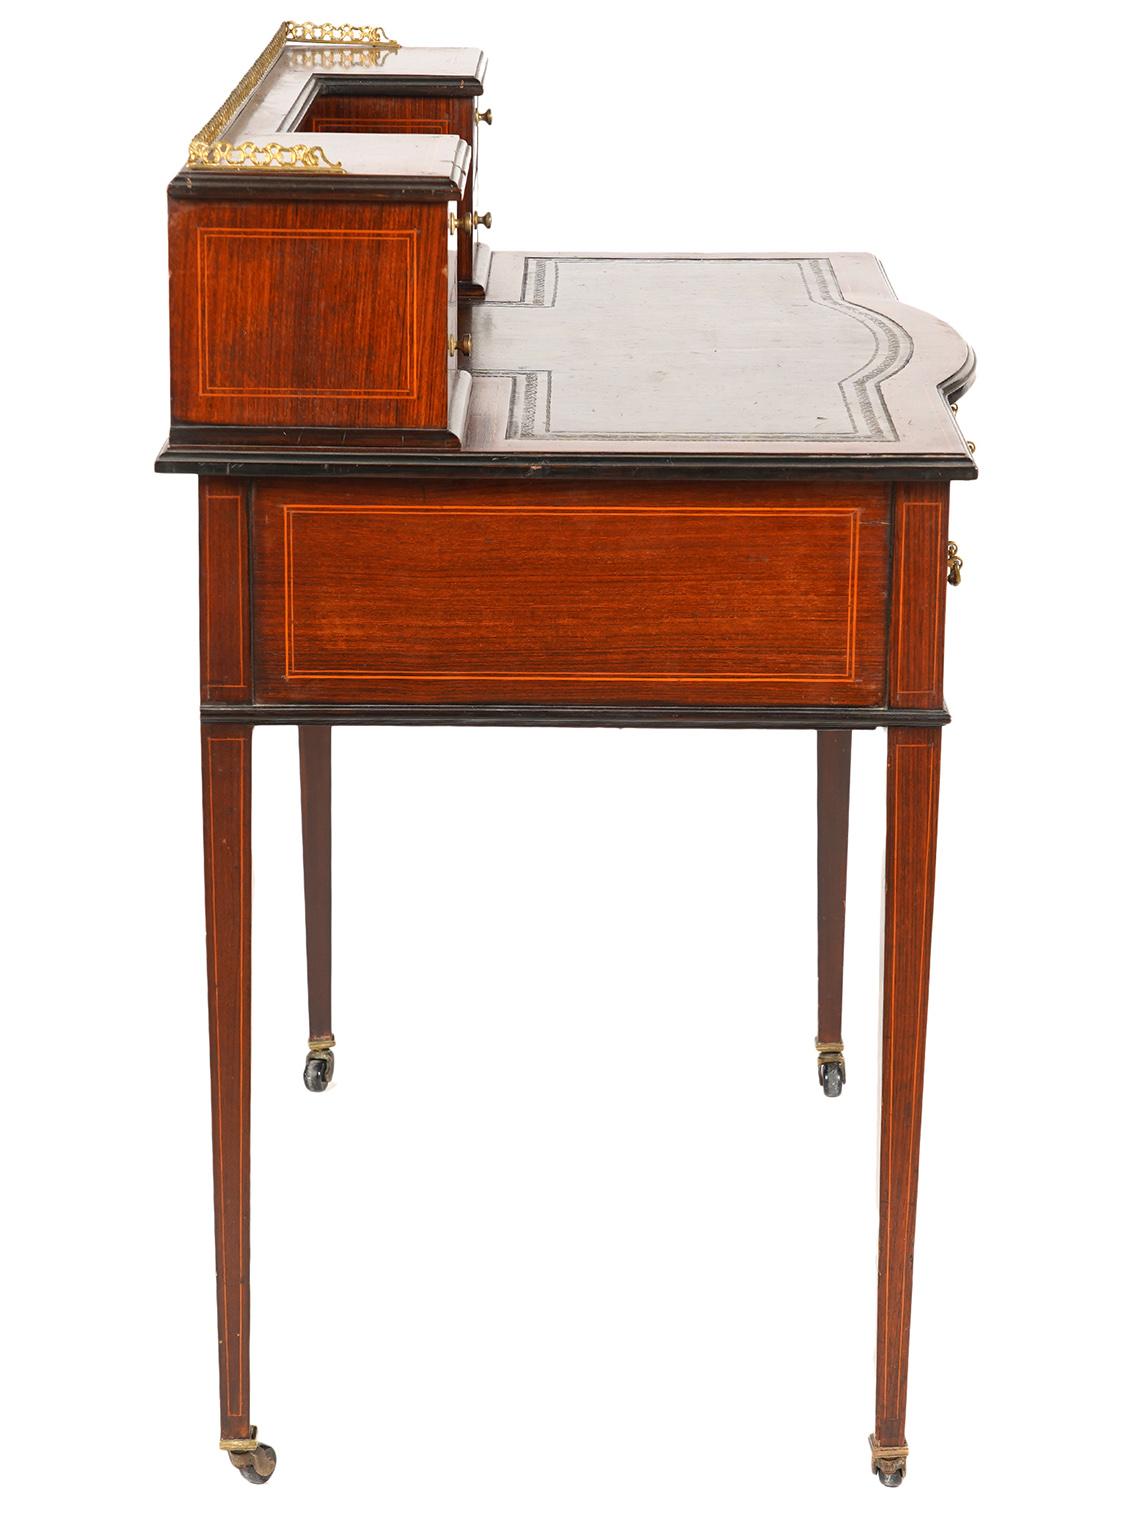 English Edwardian Inlaid Mahogany Bow Front Ladies Writing Desk with Gallery 3